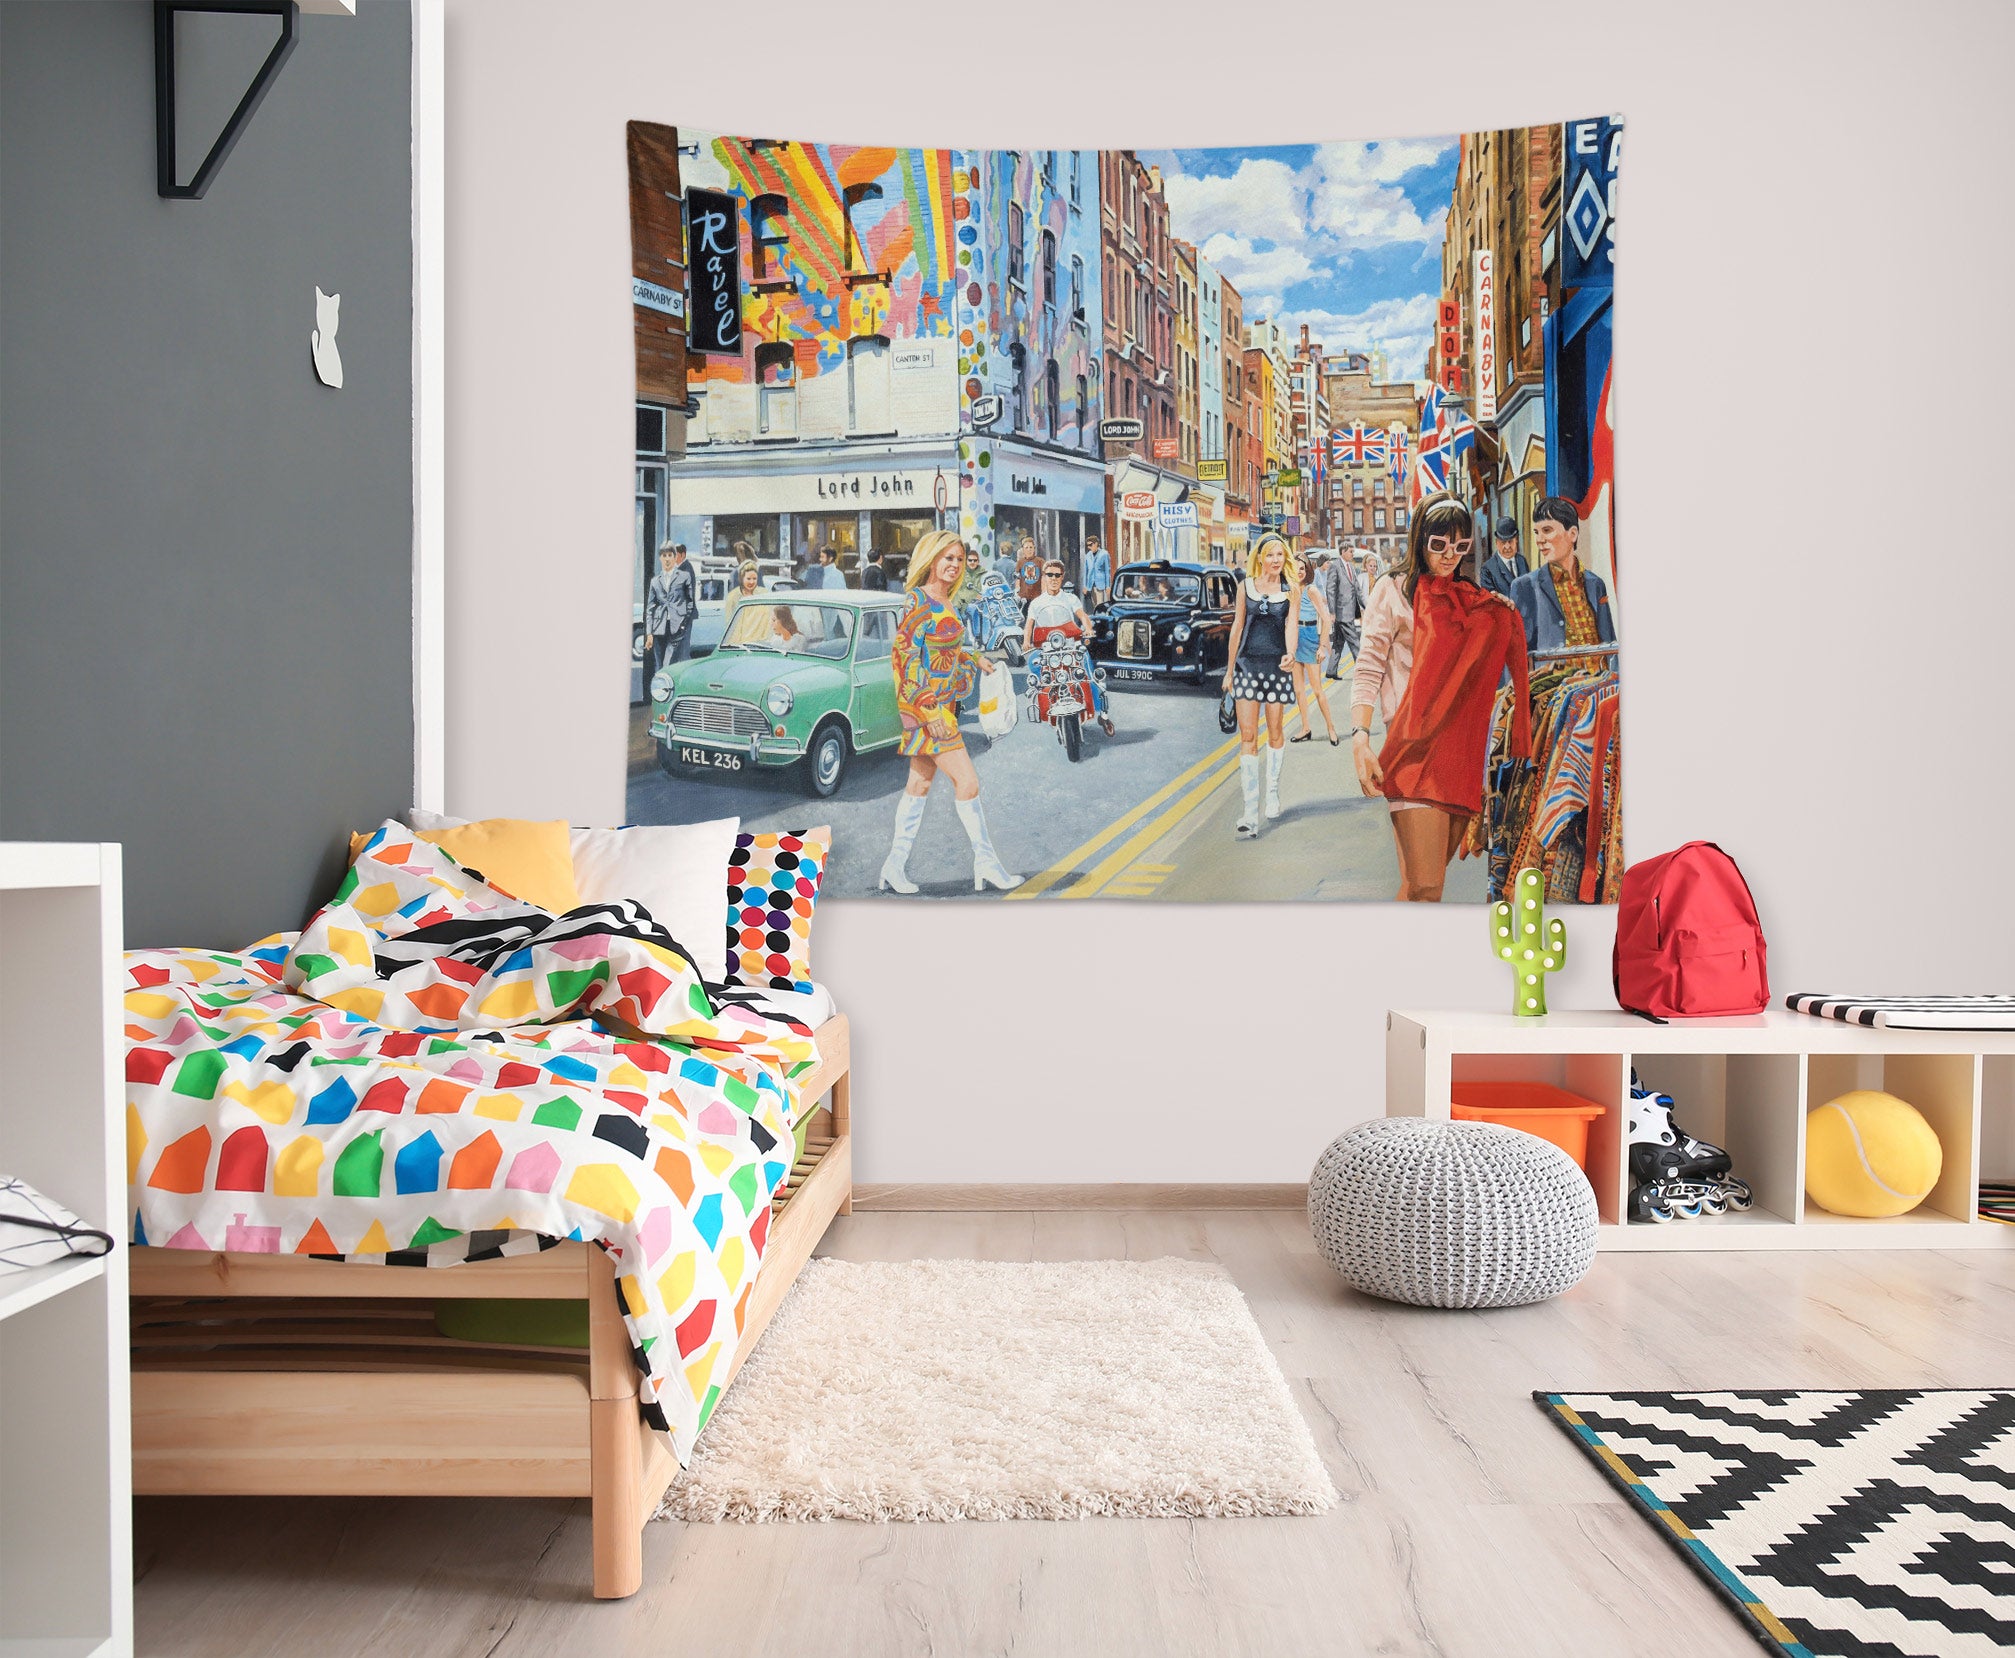 3D City Building Street 11243 Trevor Mitchell Tapestry Hanging Cloth Hang